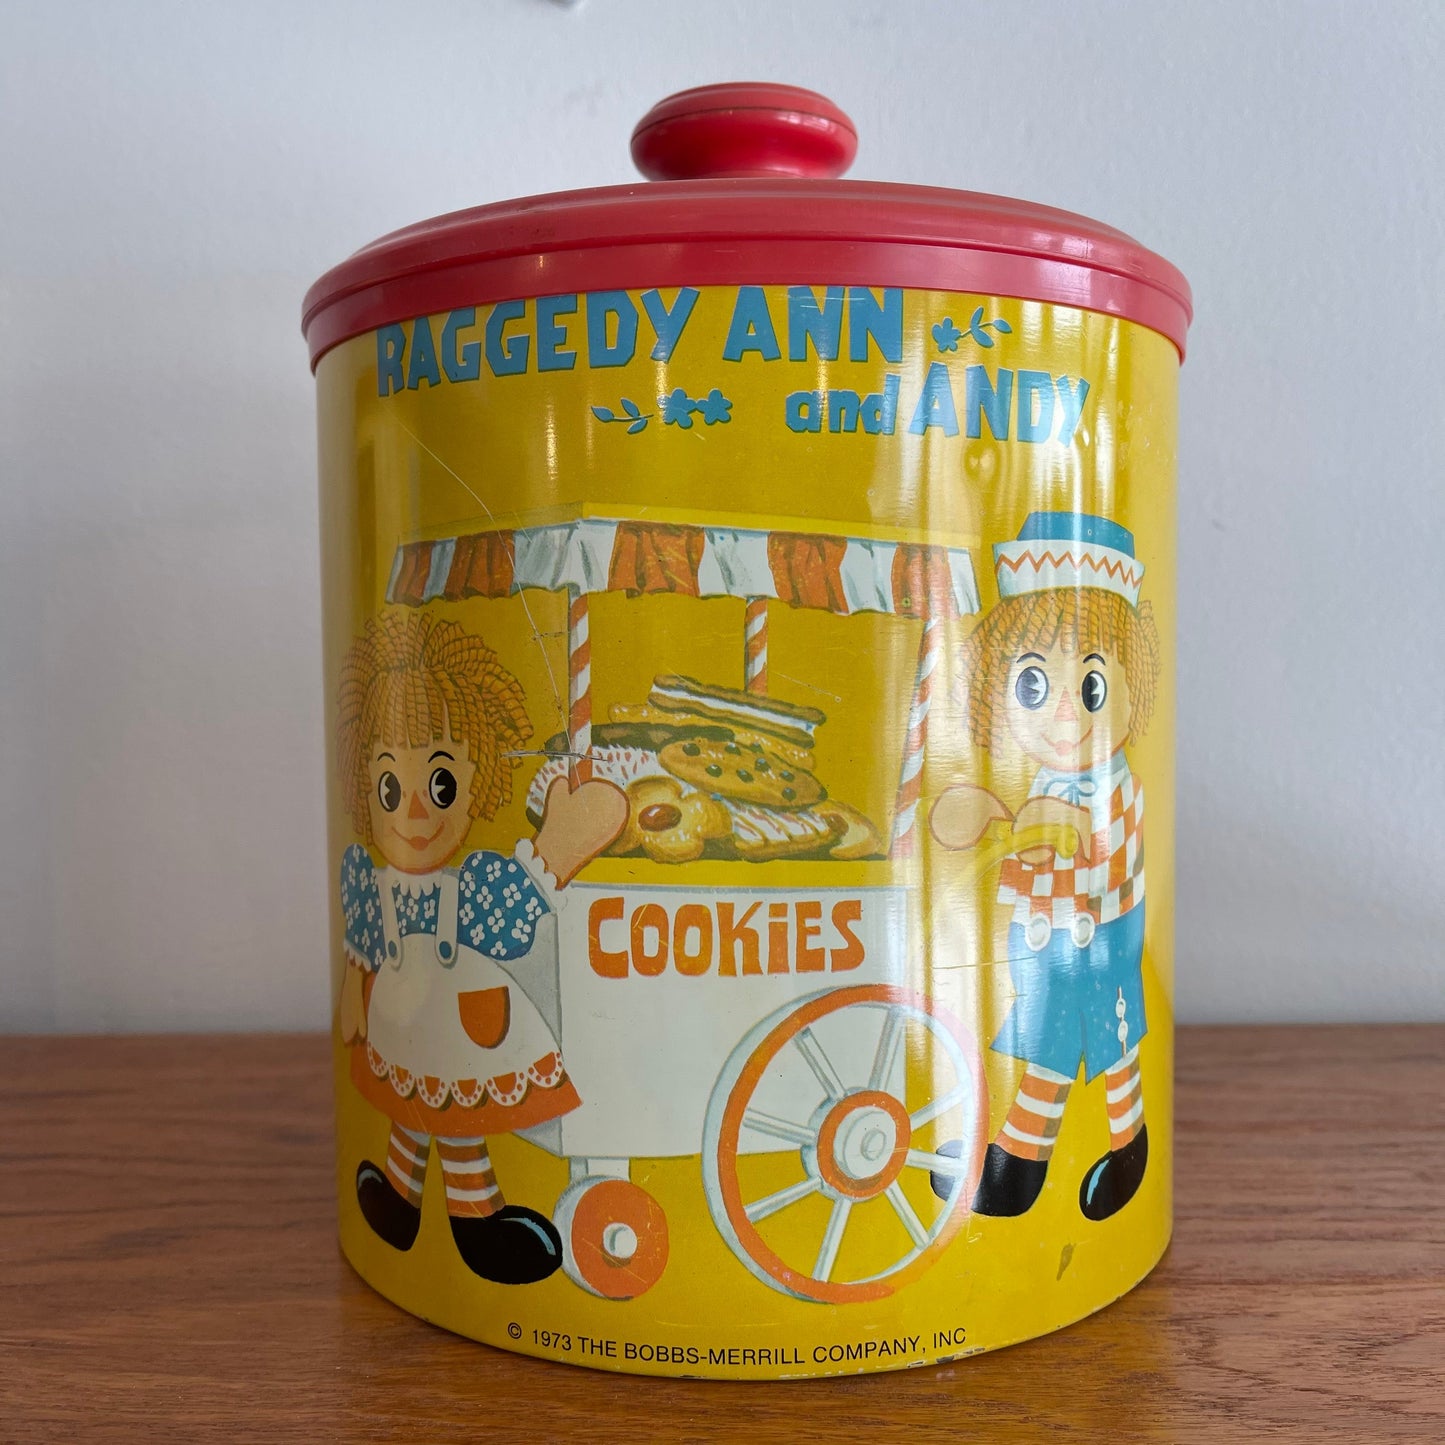 Vintage Raggedy and Andy Cookies Tin Container